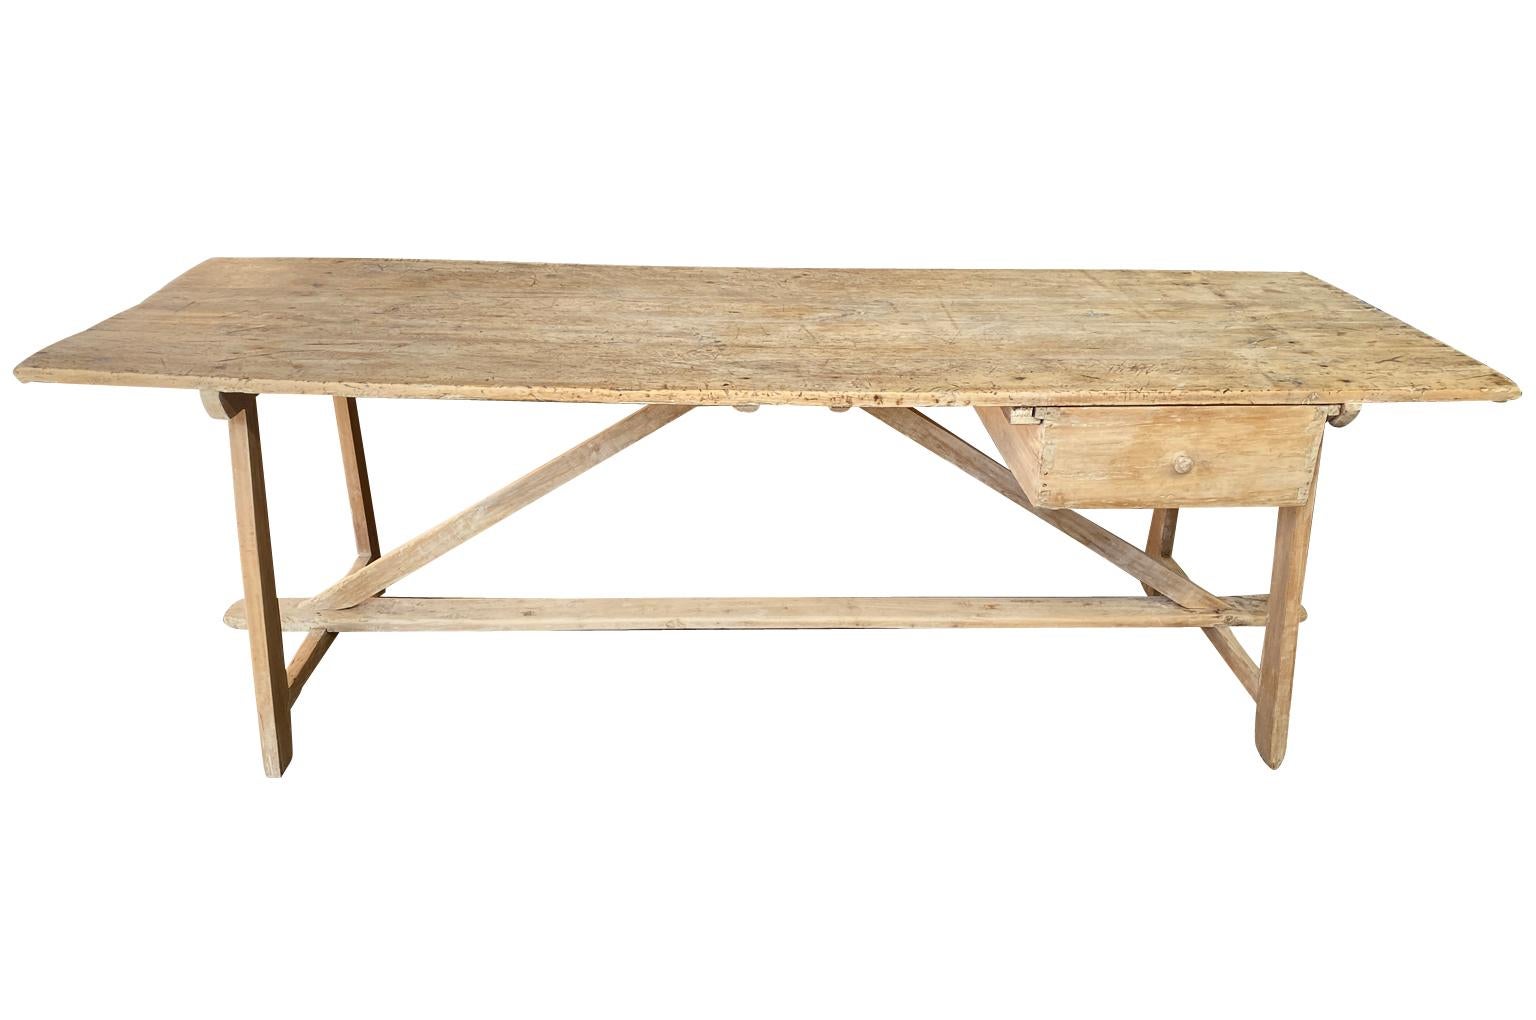 A very handsome 18th century Farm Table - Trestle Table from the Catalan region of Spain.  Soundly constructed from well patina'd poplar with a removable drawer.  Super patina. 